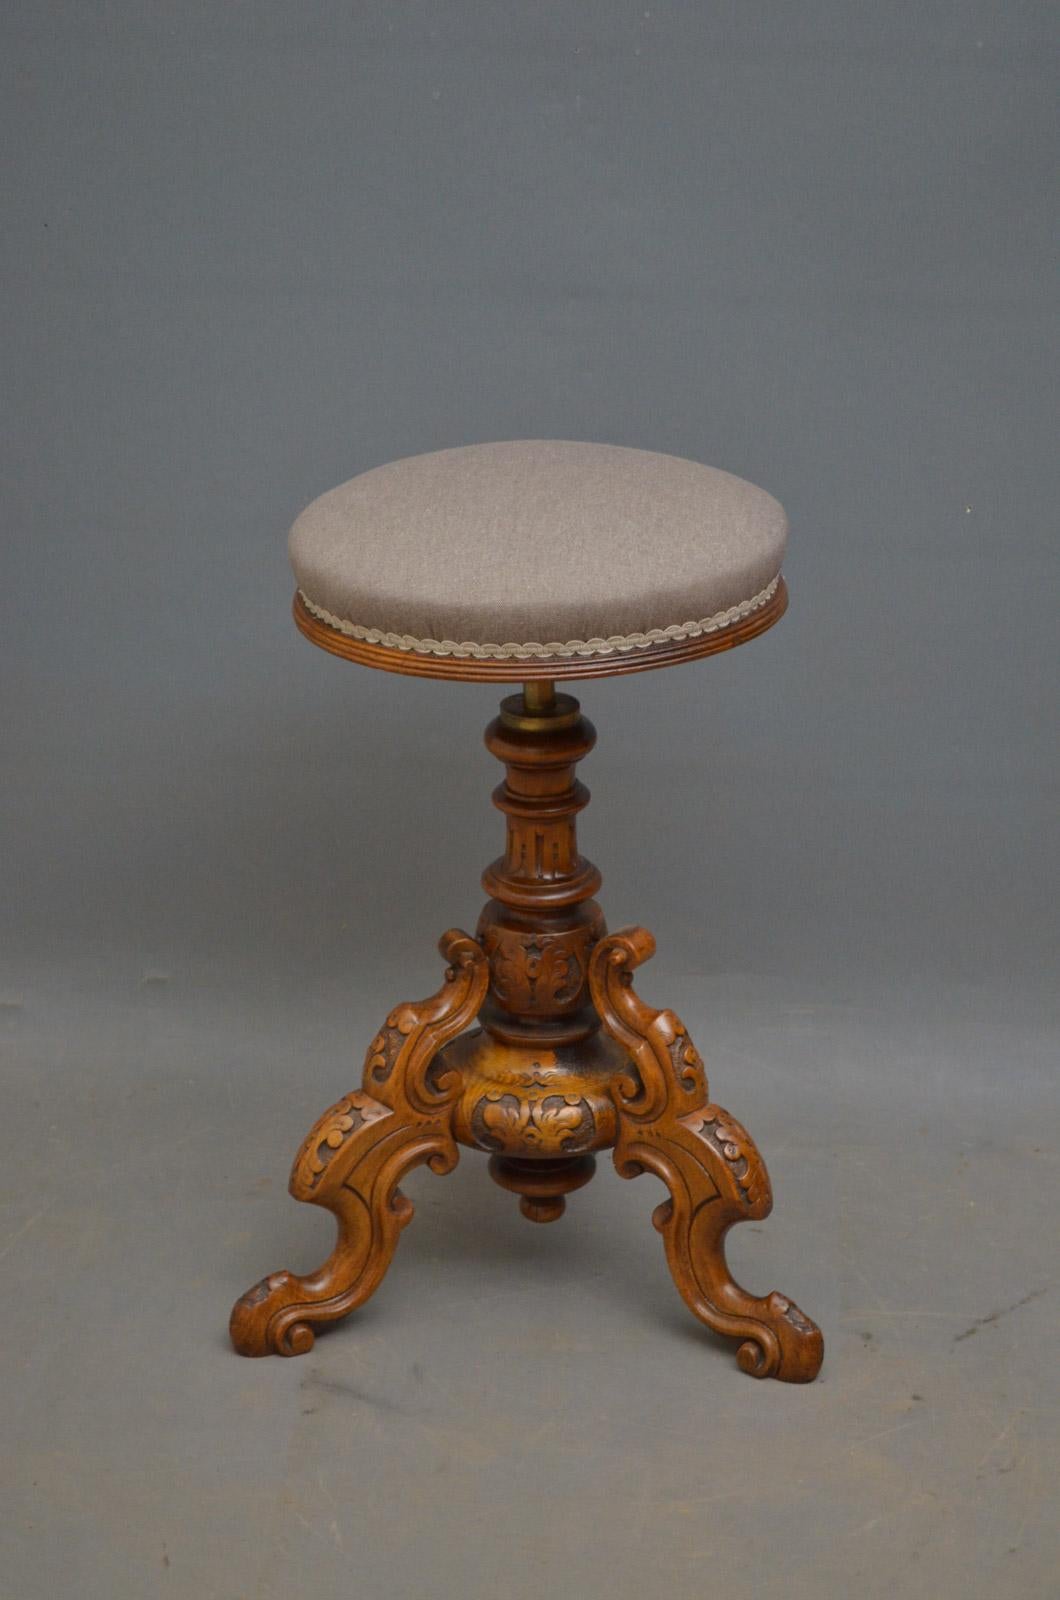 Sn4388, Victorian dressing table stool in walnut, having height adjustable seat and finely carved column terminating in three cabriole legs, circa 1870.
Measures: Height 21-24